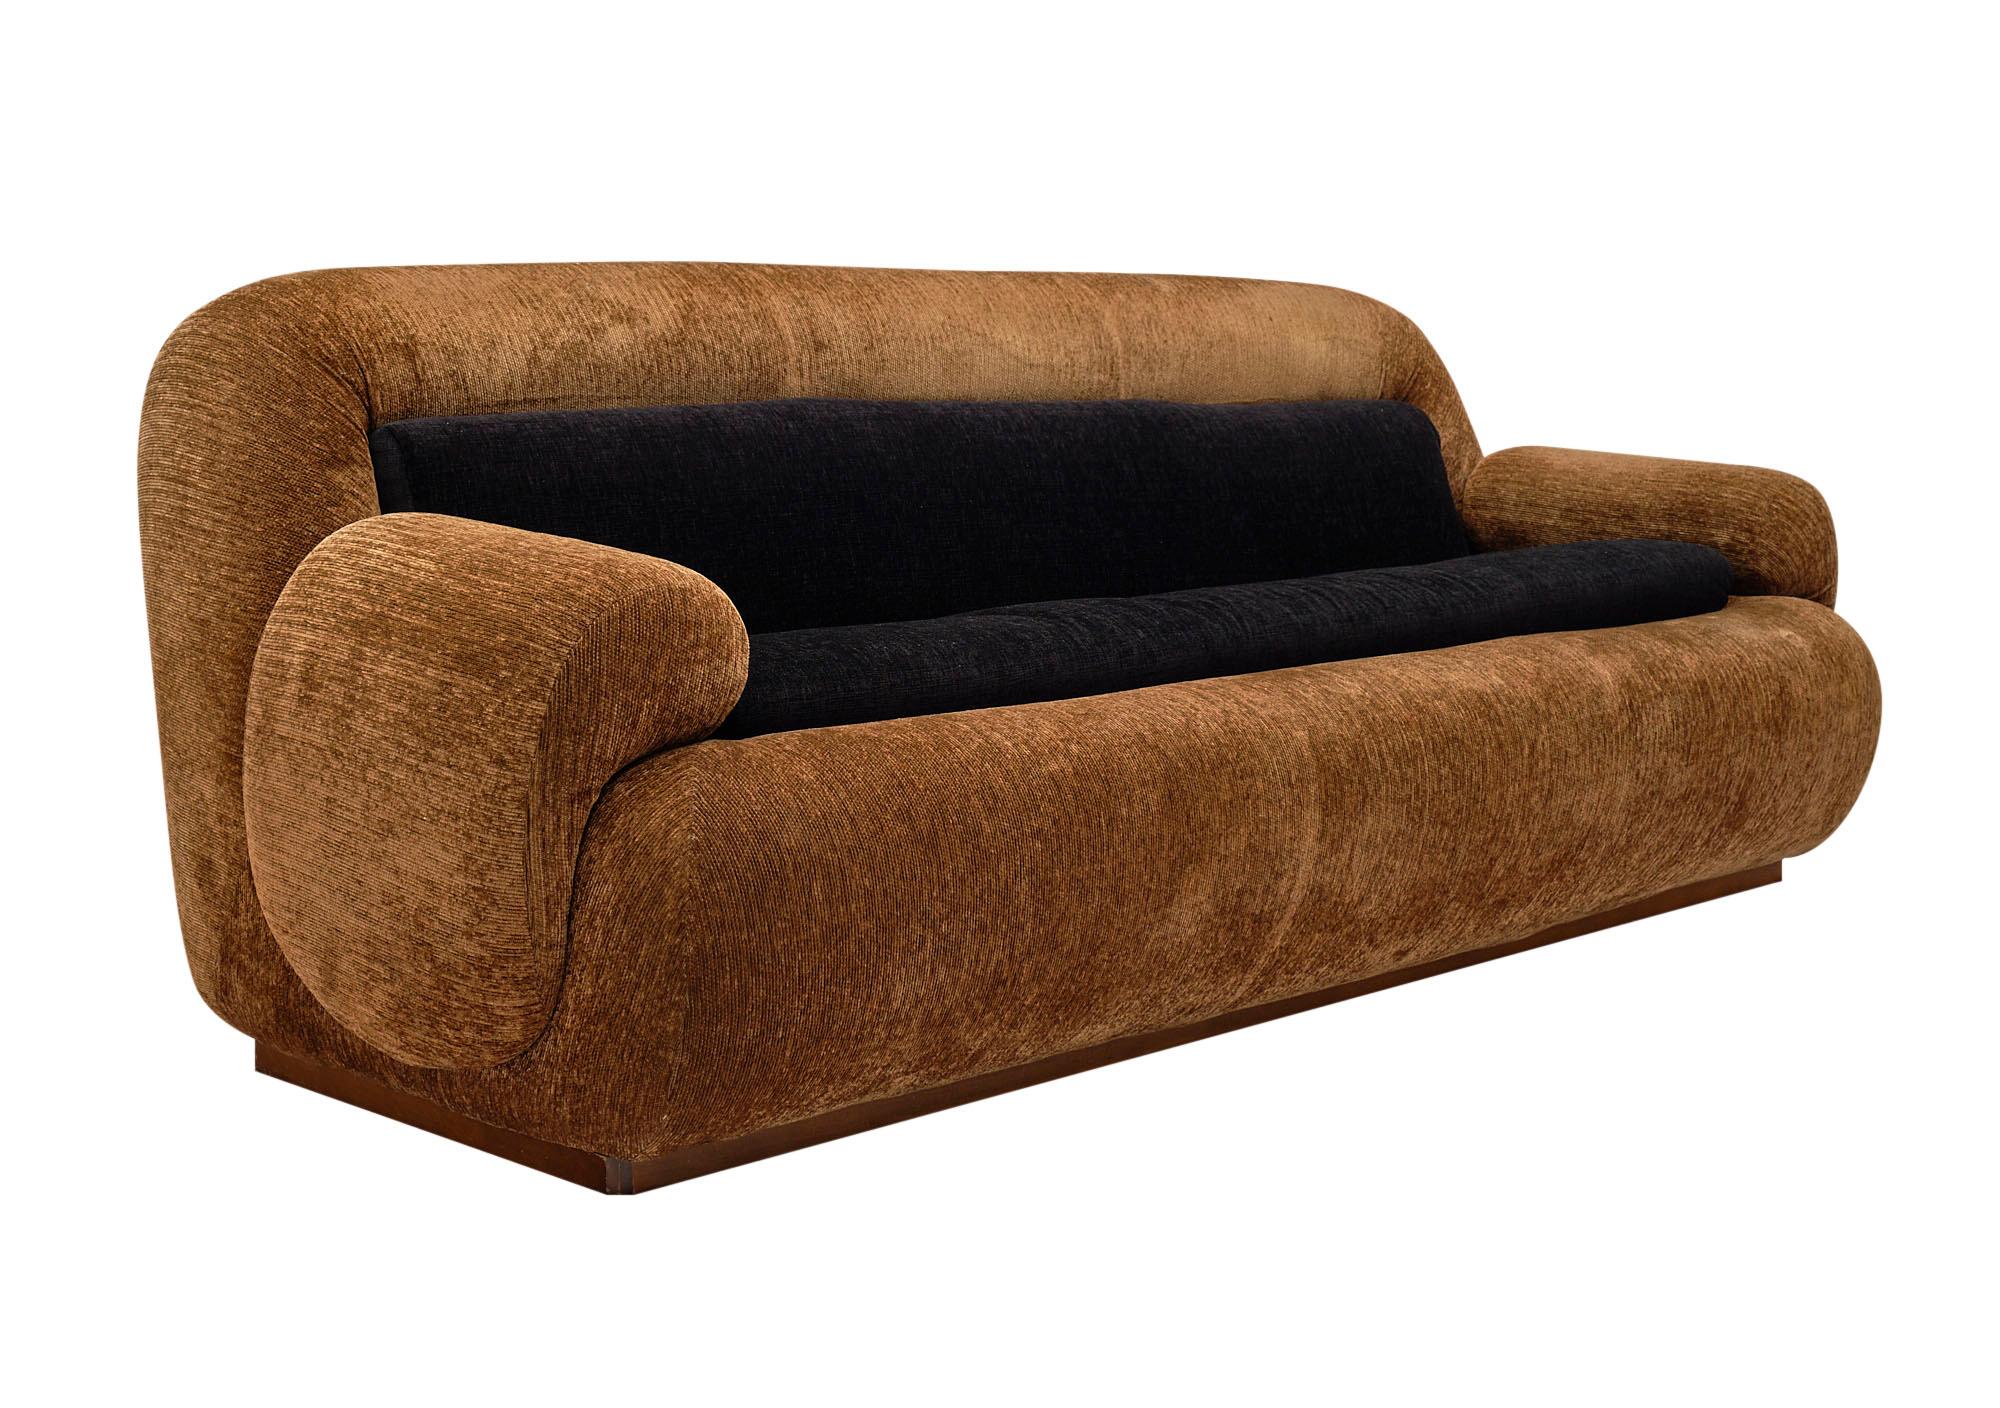 Sofa, Mid-Century Modern, from Italy with brown and black corduroy upholstery. This piece is in the style of Mario Bellini and is extremely comfortable. It is supported by a walnut base.